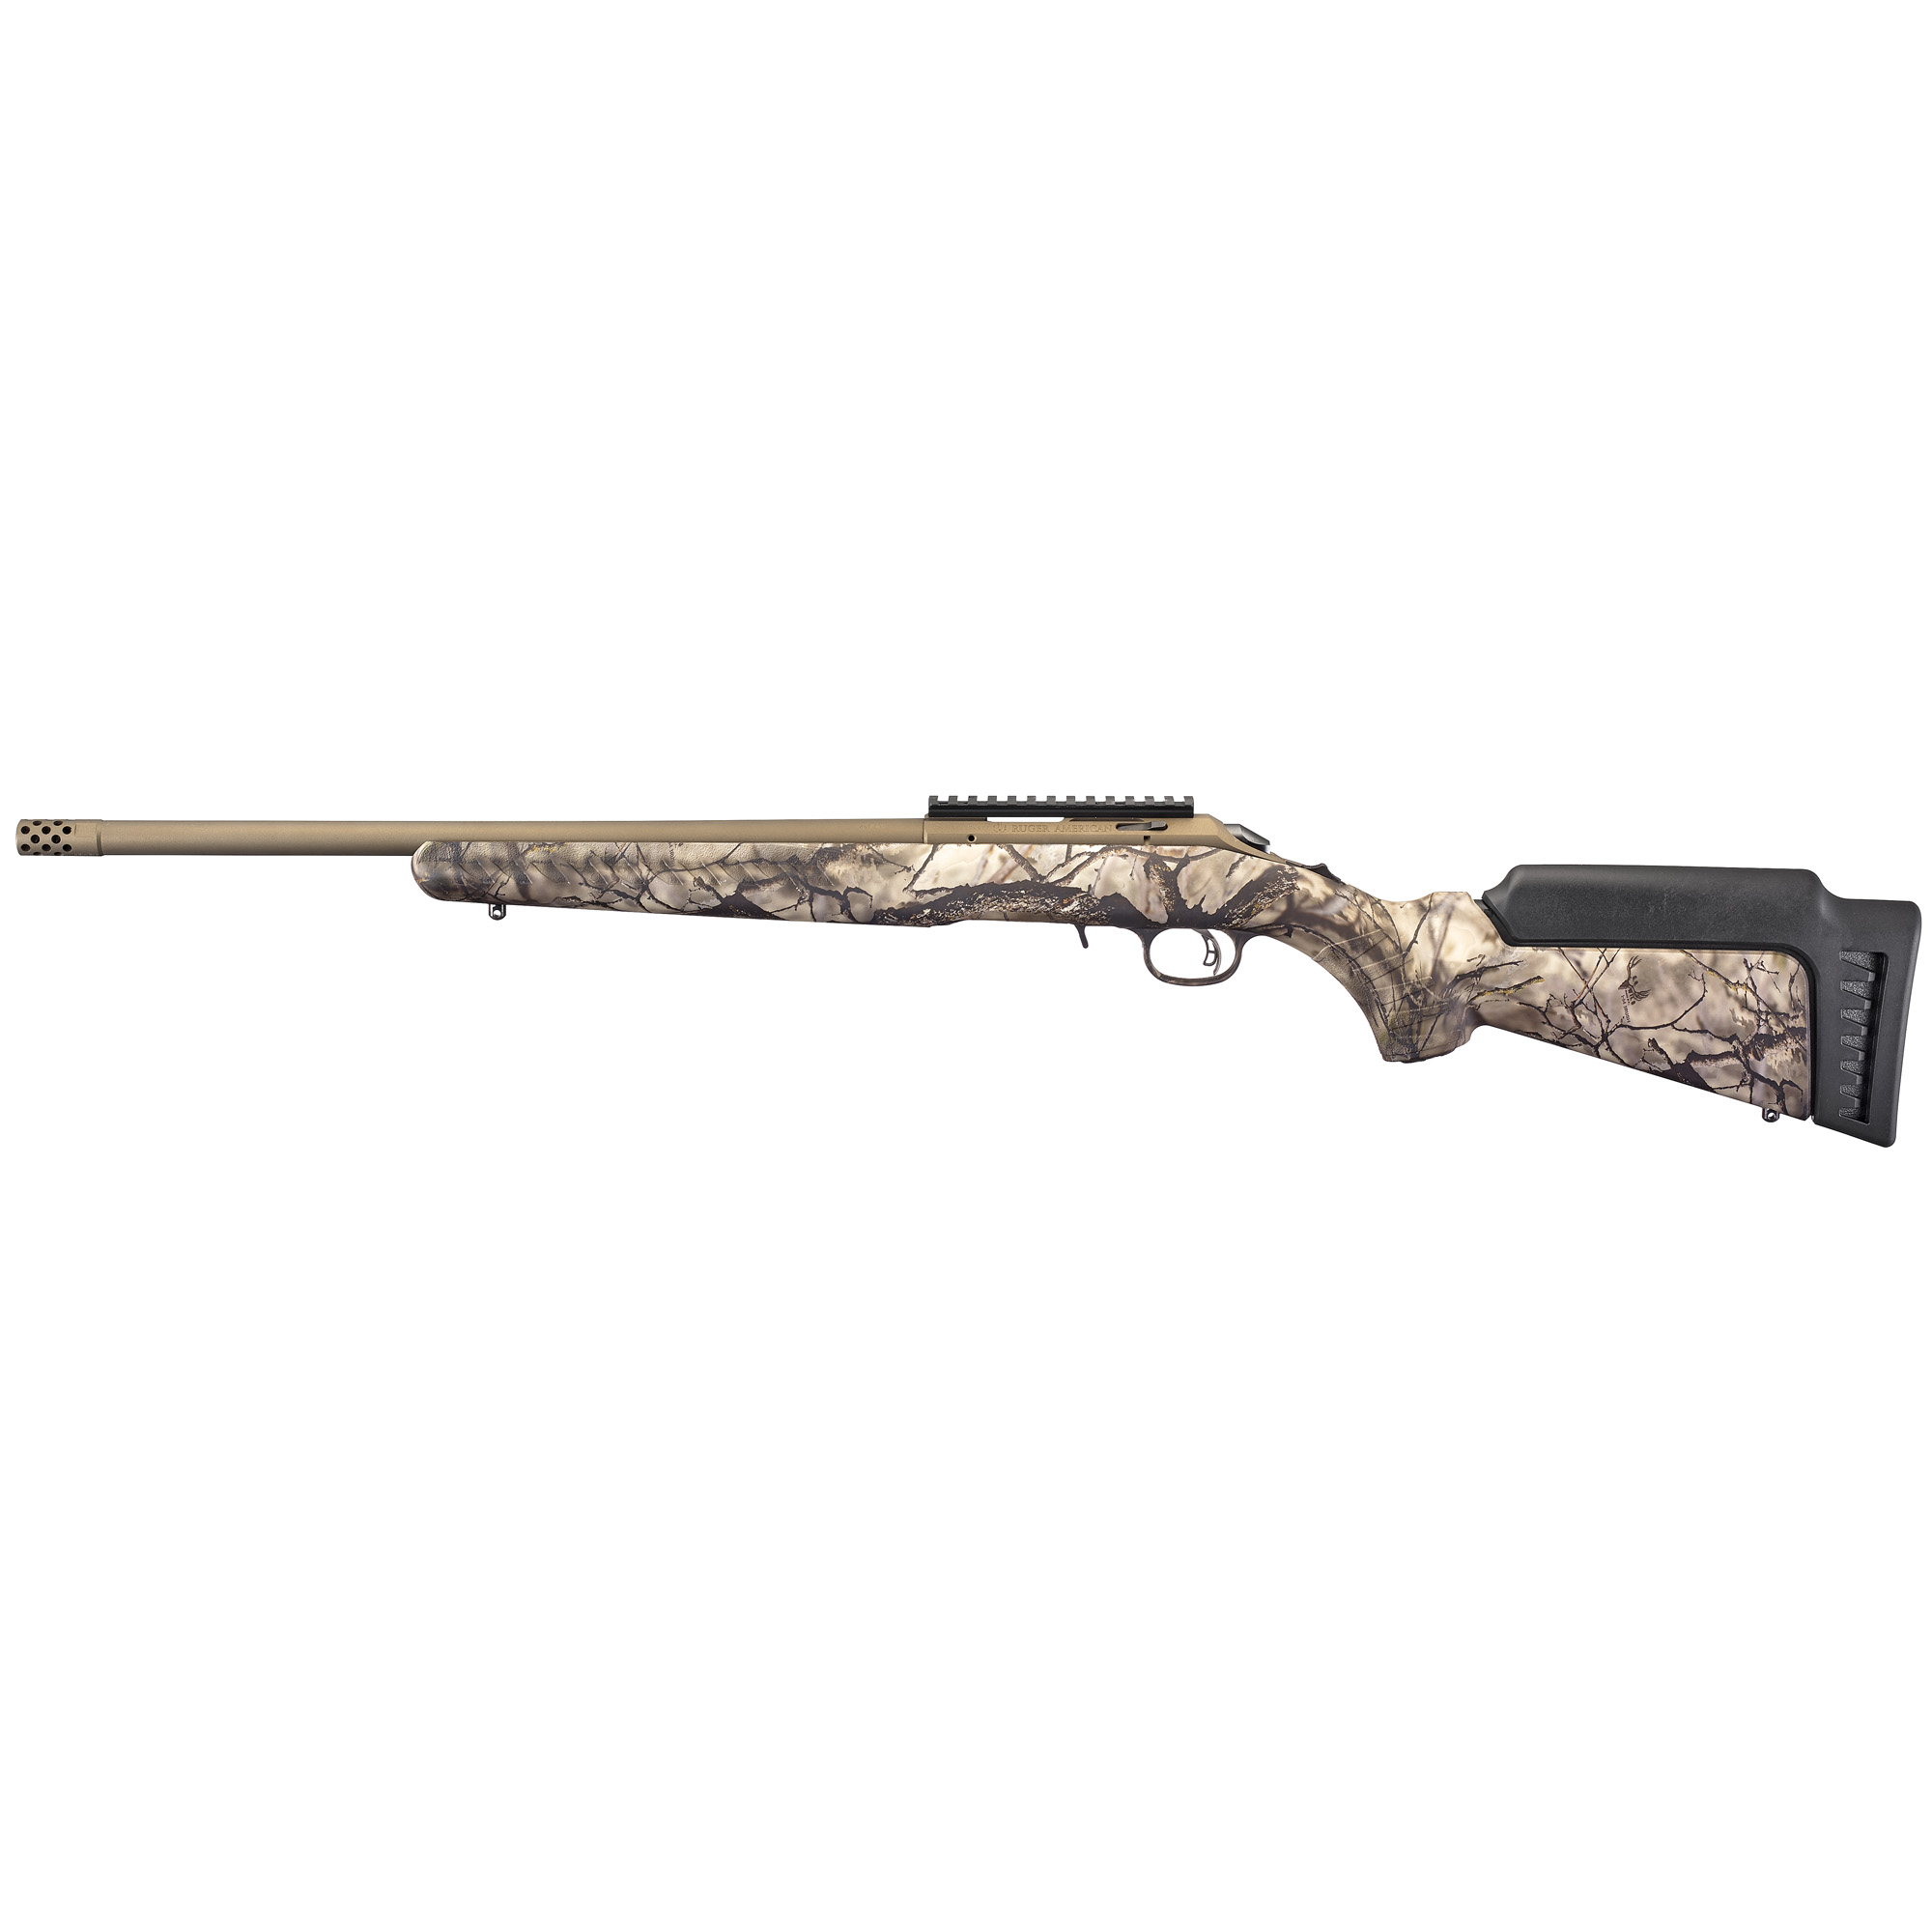 RUGER AMERICAN 17HMR 18 CAMO 9RD